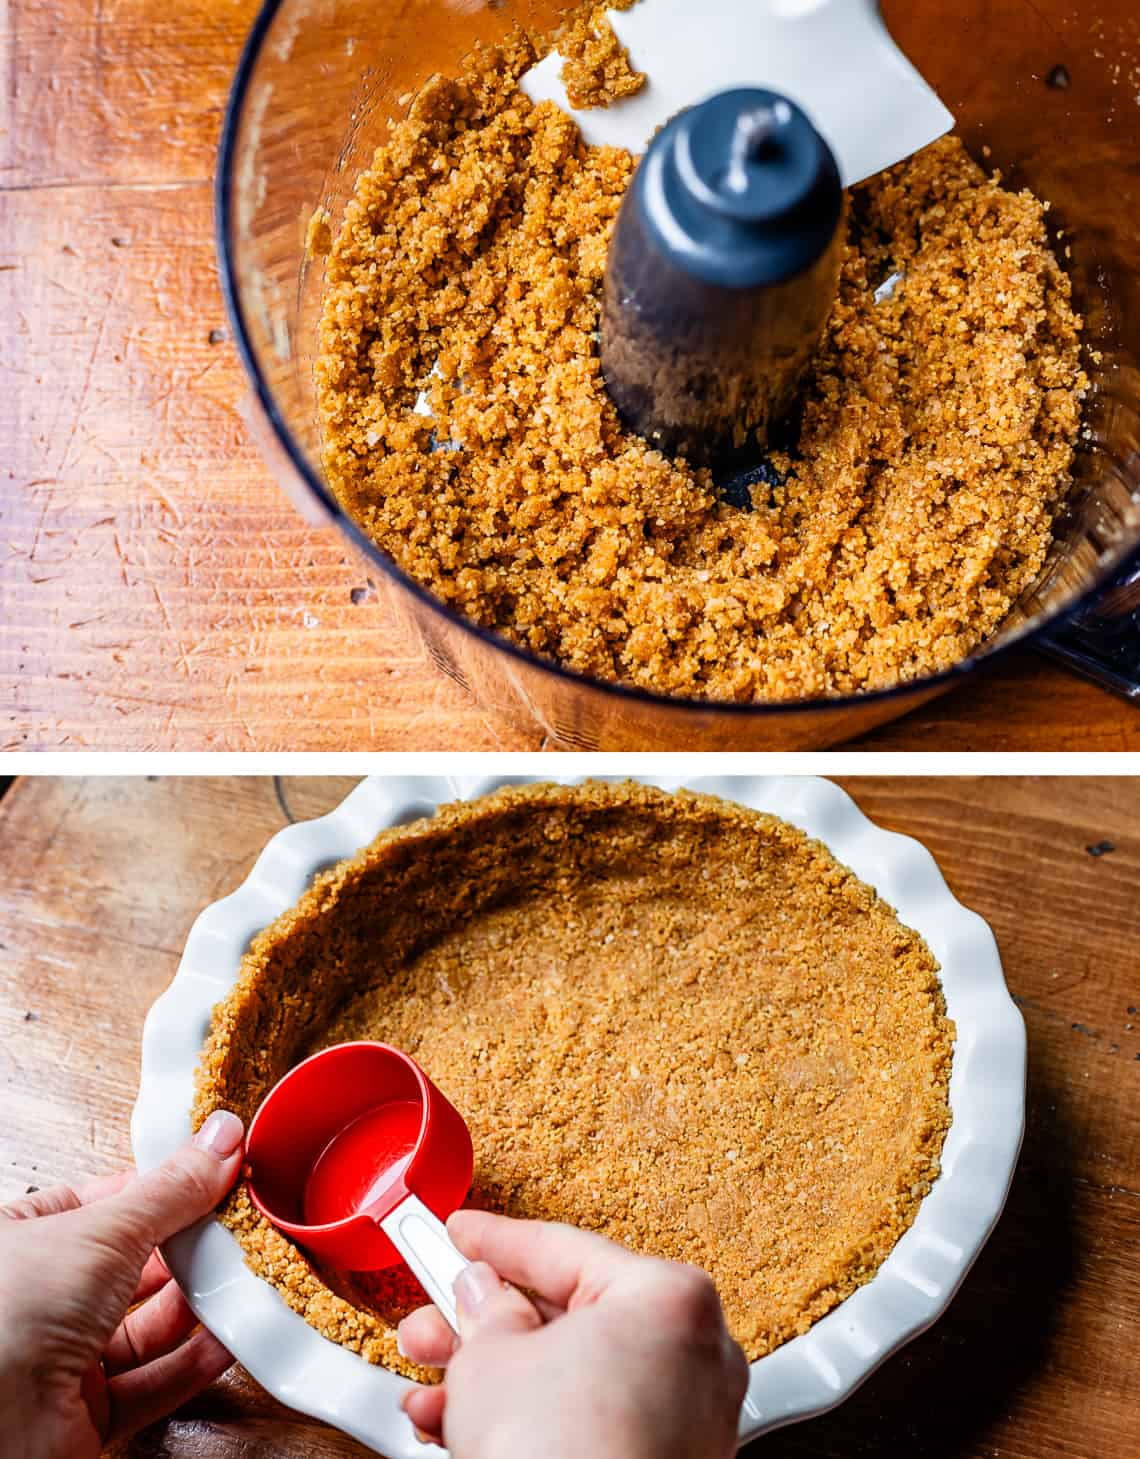 top blended crust ingredients in bowl, bottom using a measuring cup to press crust in pan.